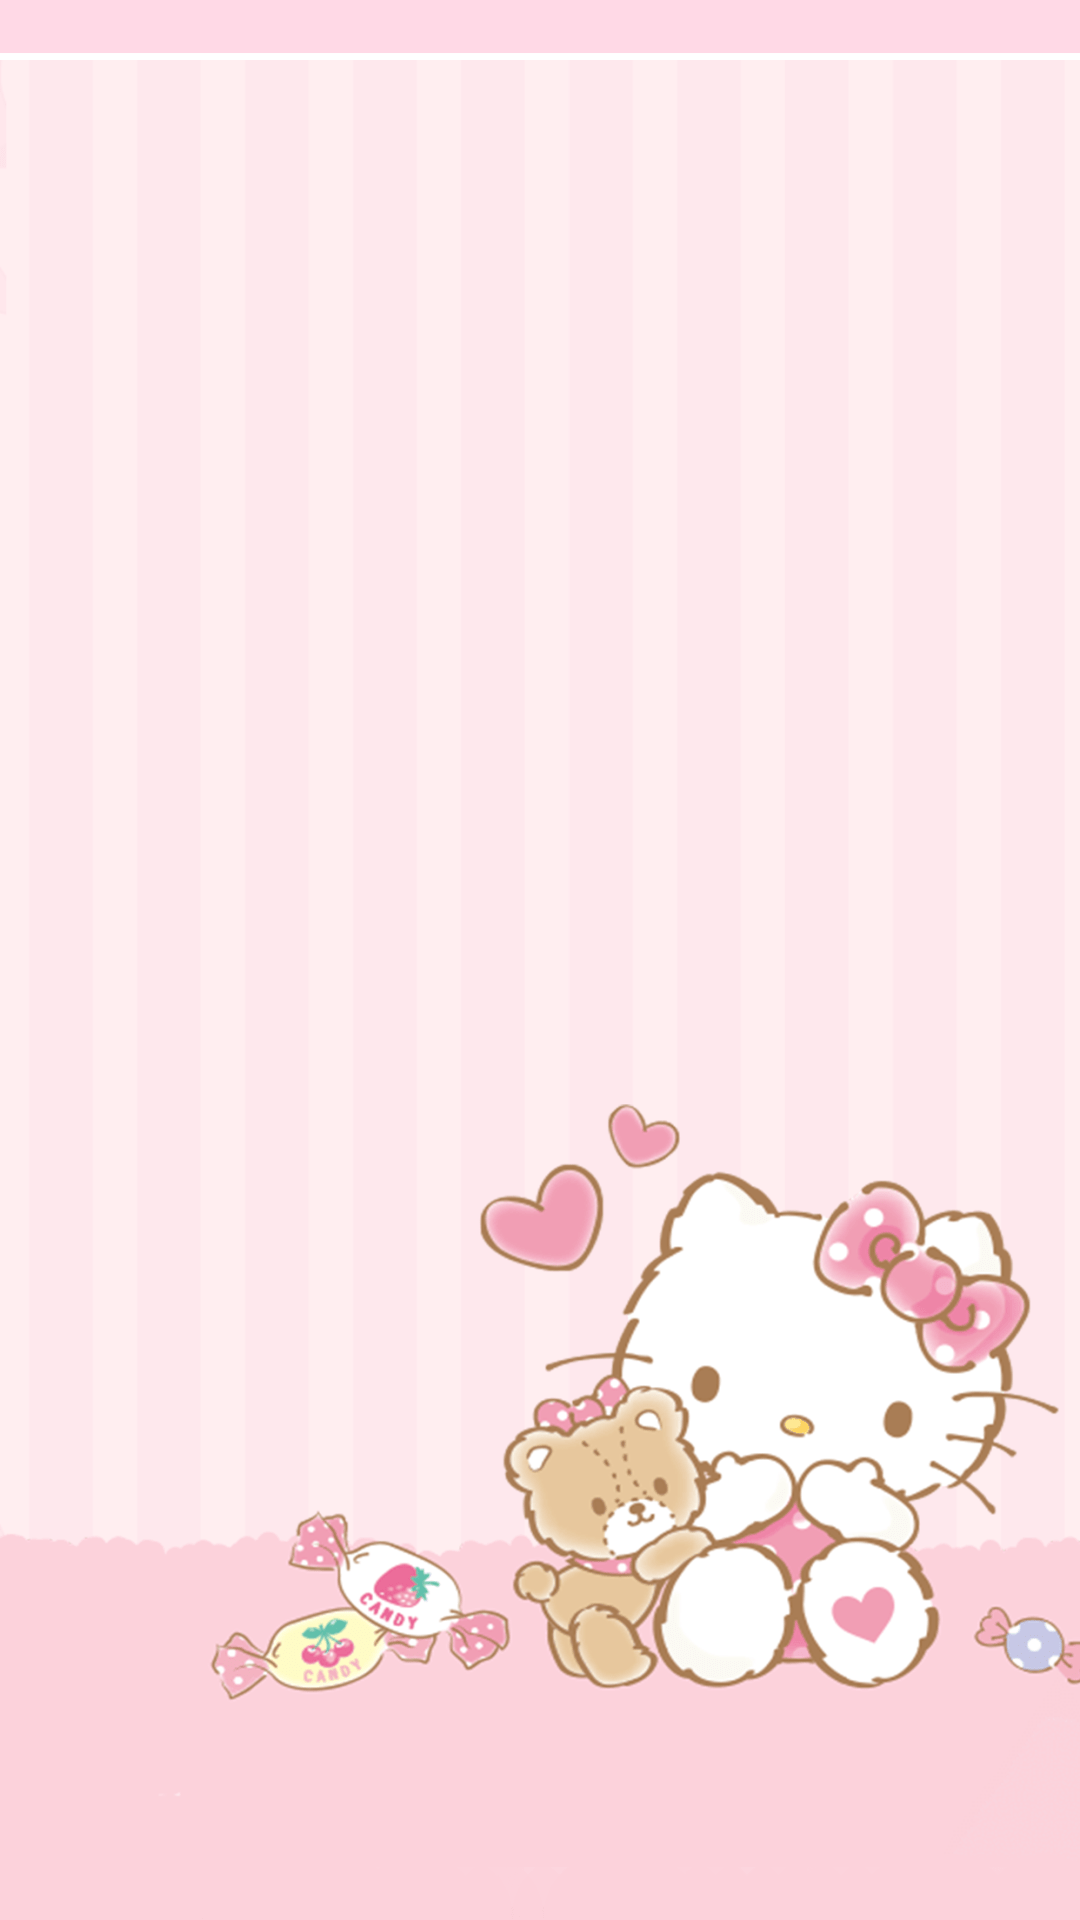 Hello Kitty iPhone Wallpaper with image resolution 1080x1920 pixel. You can make this wallpaper for your iPhone 5, 6, 7, 8, X backgrounds, Mobile Screensaver, or iPad Lock Screen - Hello Kitty, teddy bear, Sanrio